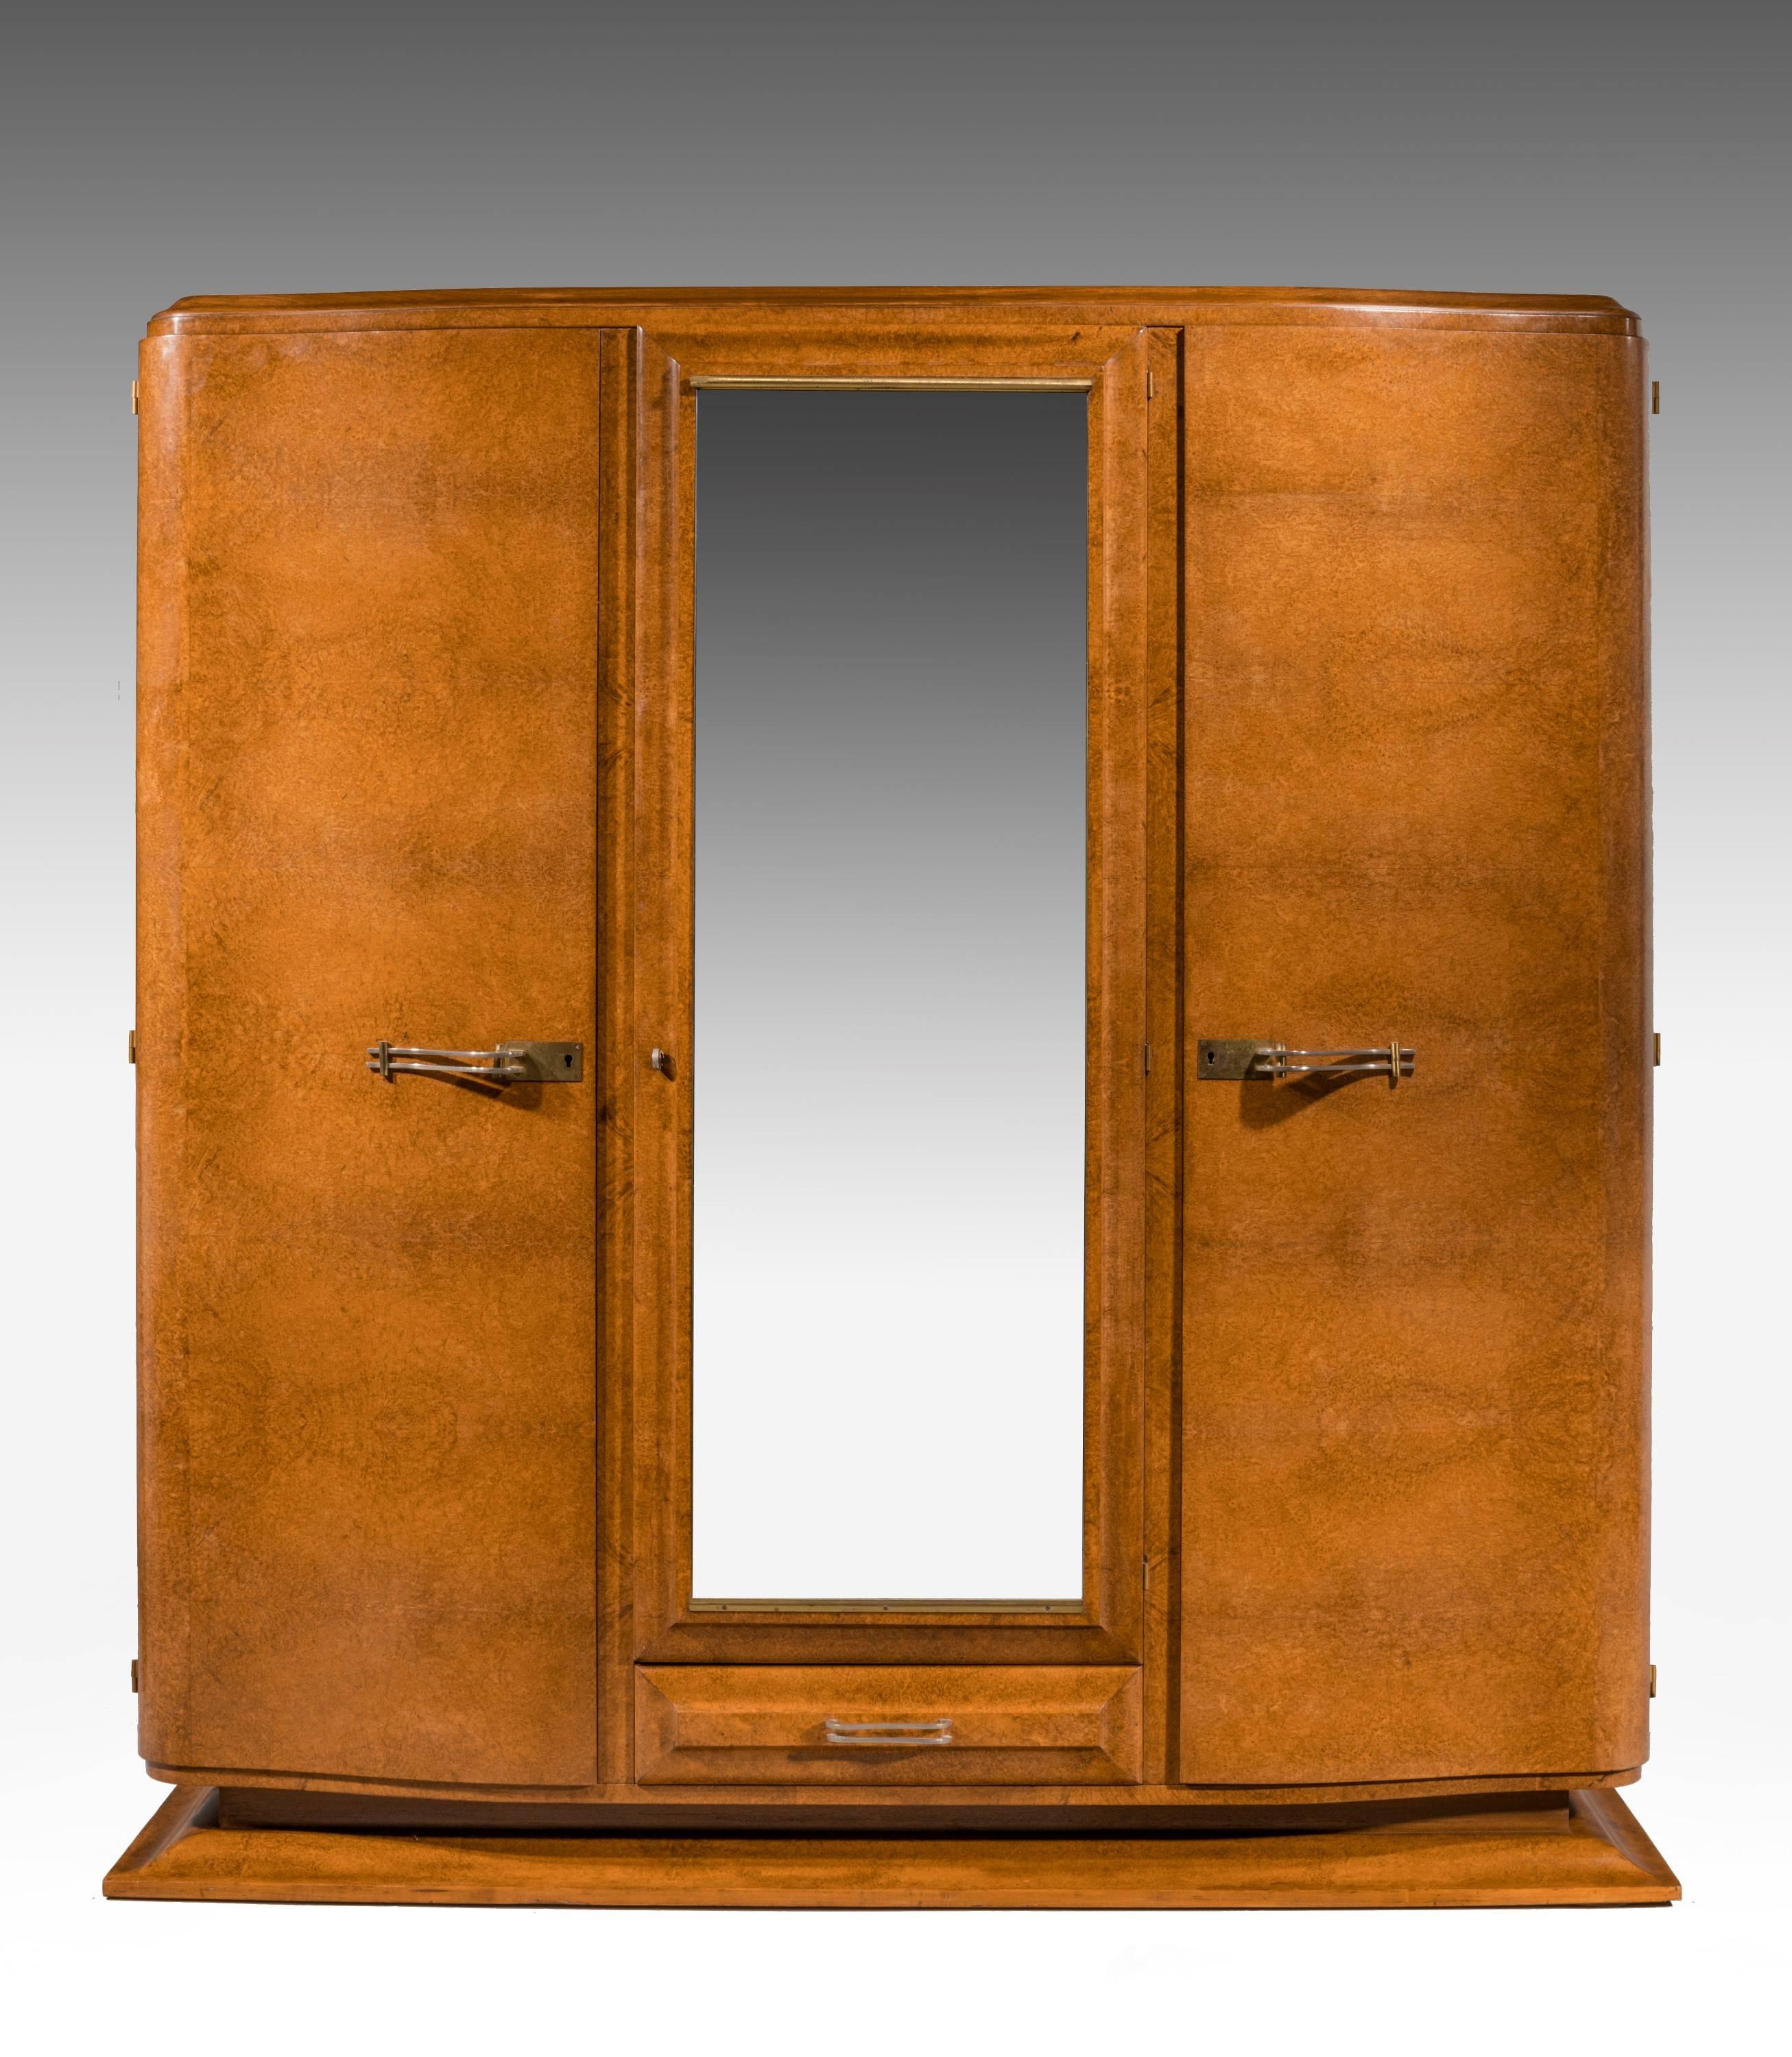 A quite exceptionally fine Art Deco birchwood wardrobe of complex construction. With beautifully highly figured timbers, with an interior lined with a pale blonde wood. With a number of options of positions for the shelves. The whole of quite